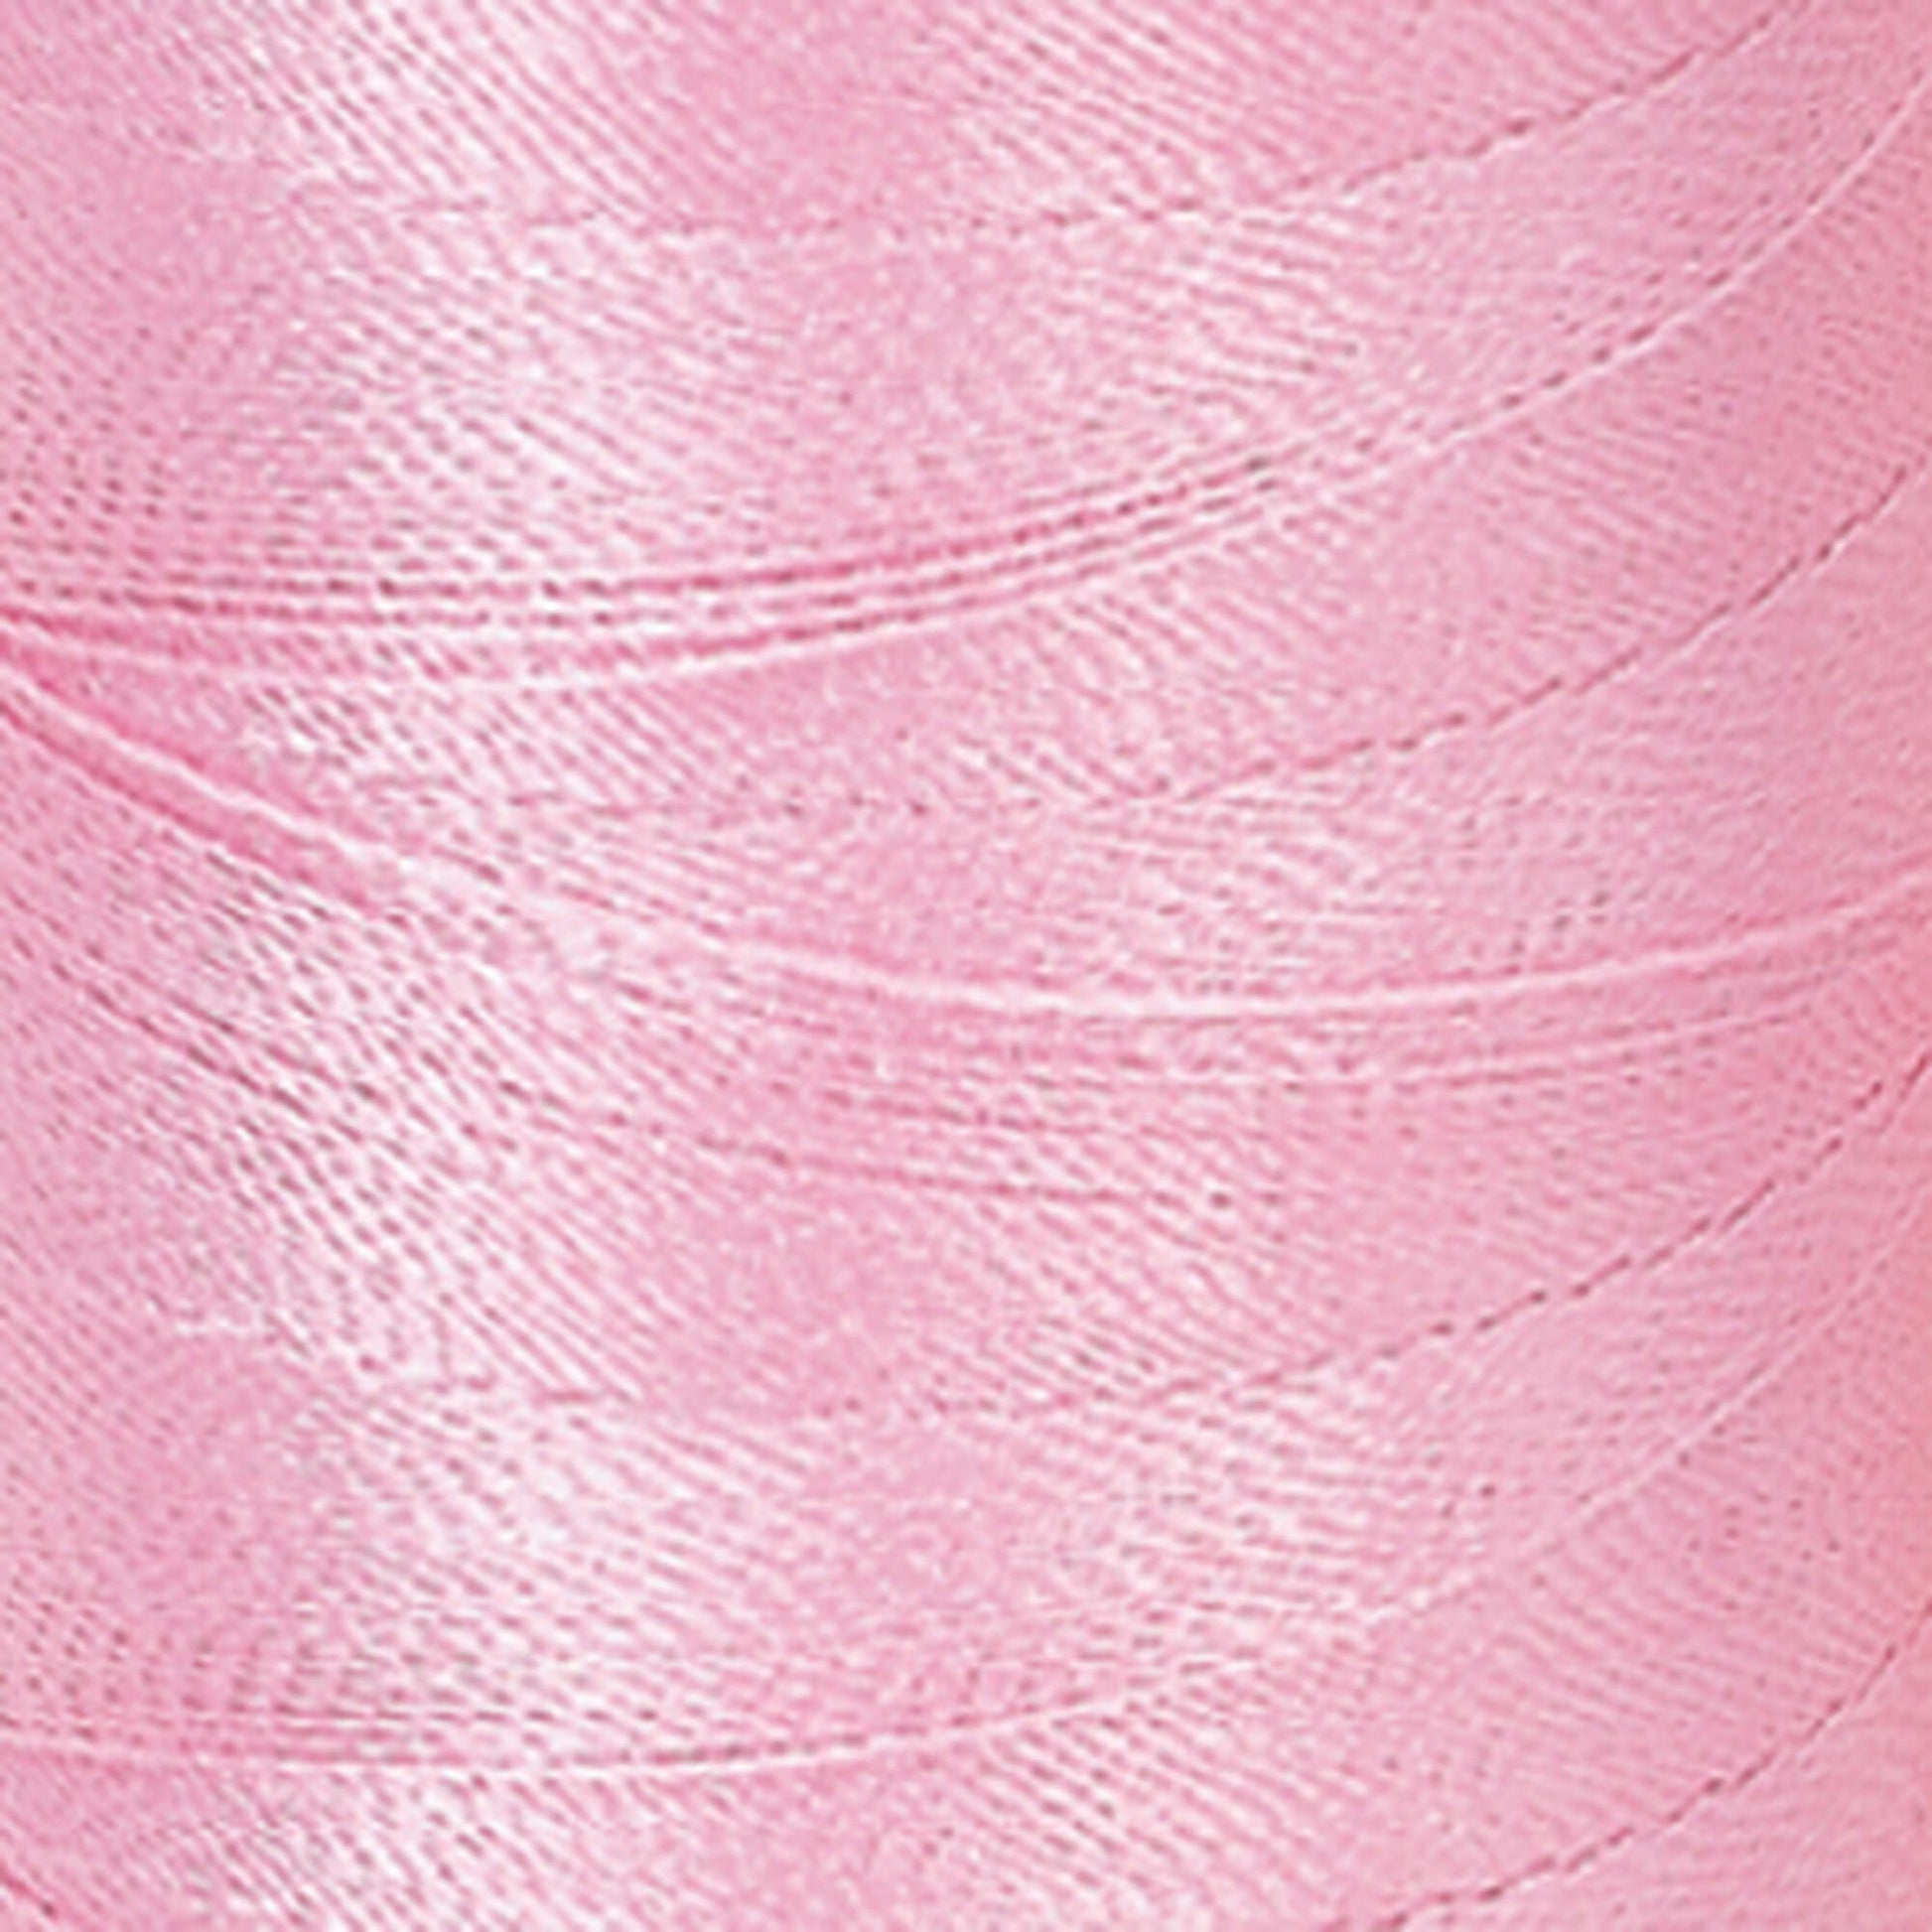 Coats & Clark Machine Embroidery Thread (1100 Yards) Rose Pink